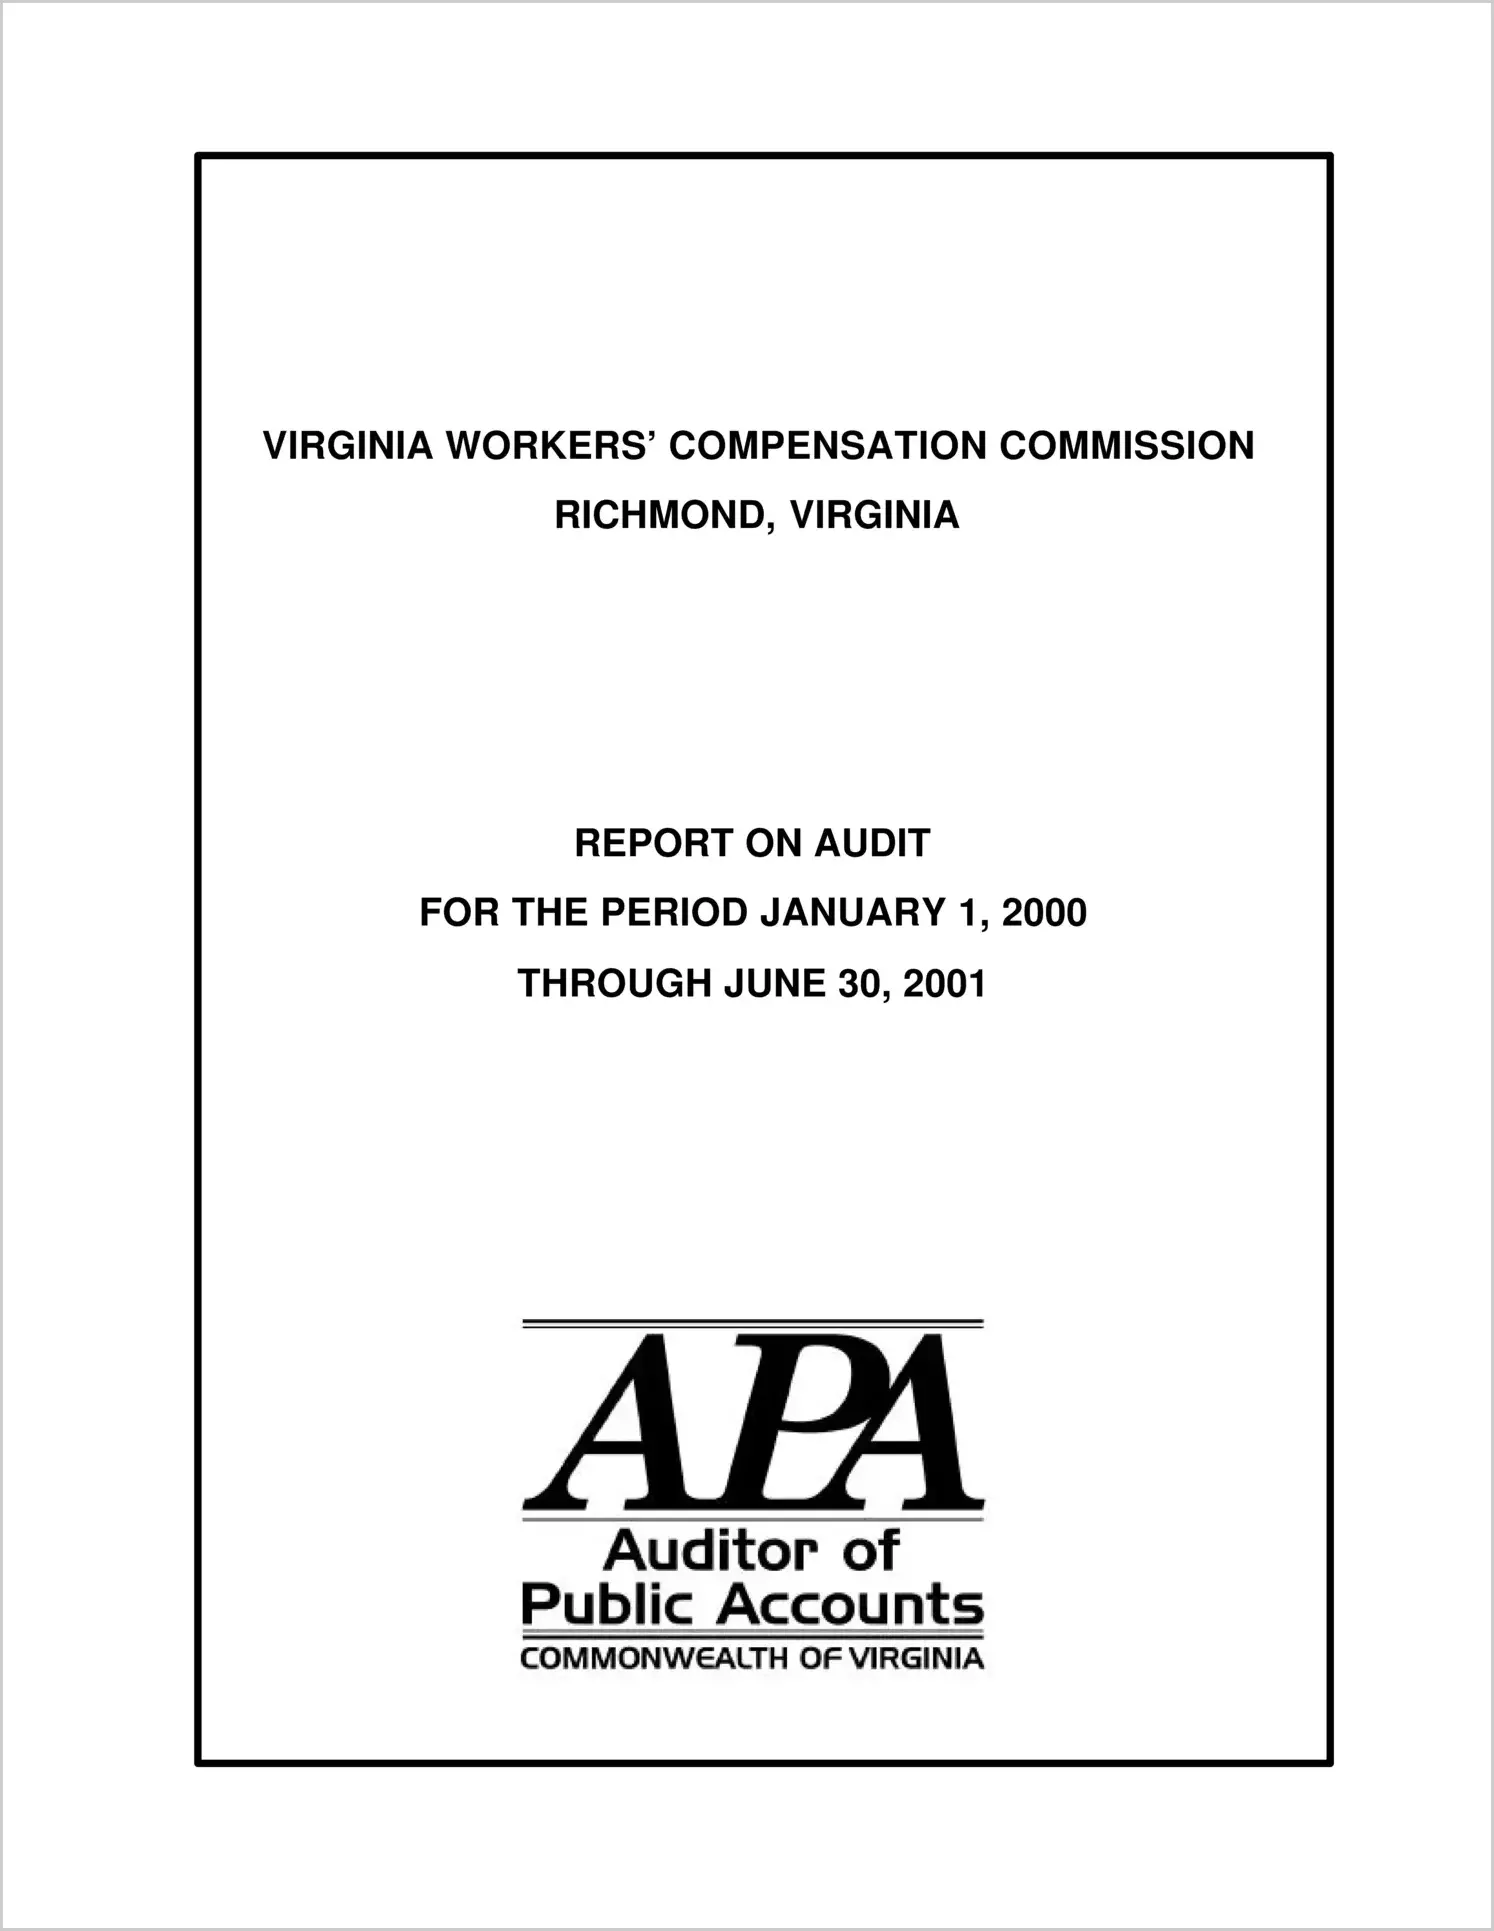 Virginia Workers` Compensation Commission for the period January 1, 2000 through June 30, 2001